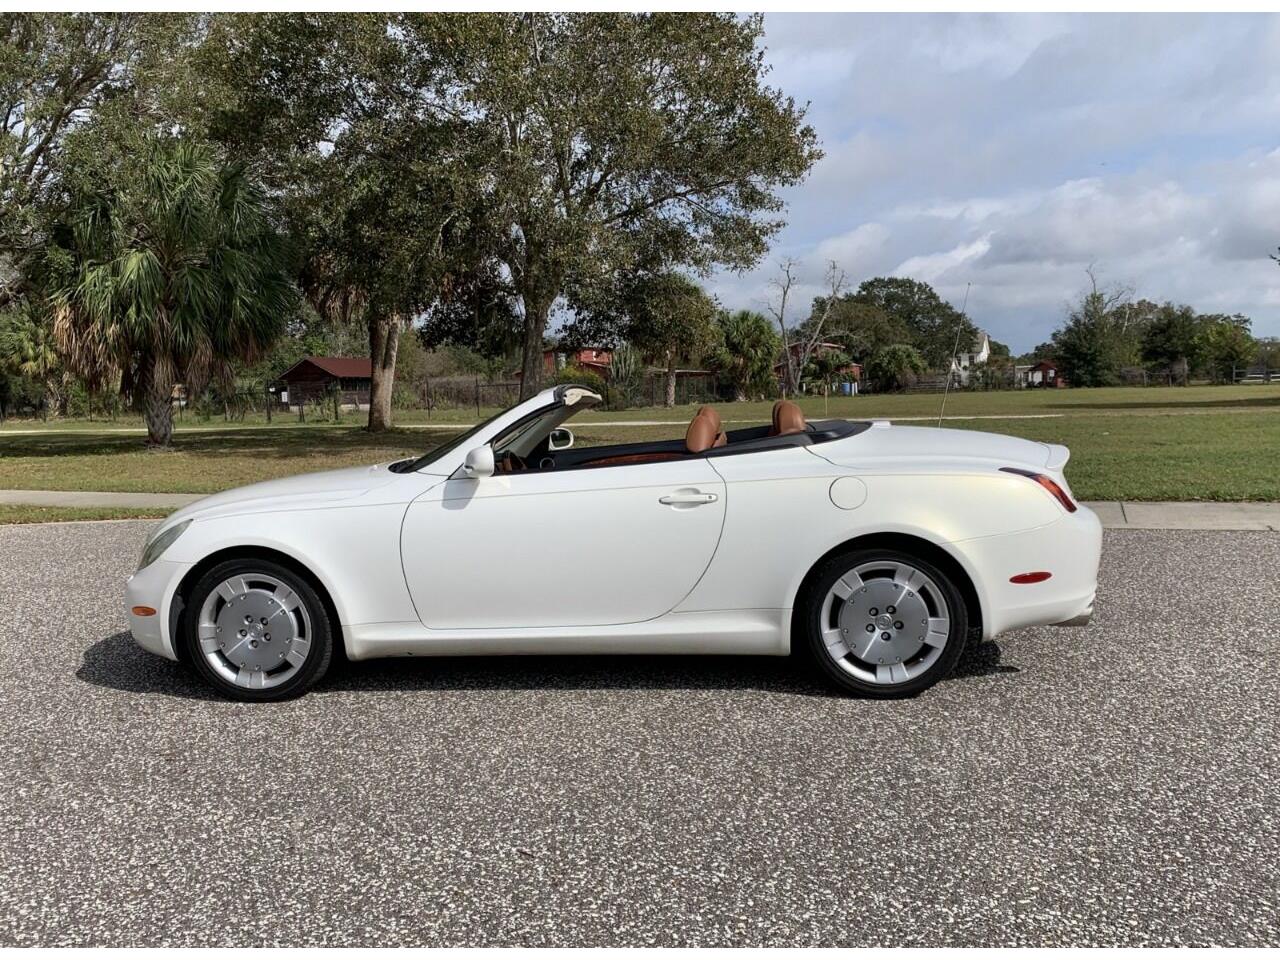 For Sale: 2002 Lexus SC400 in Clearwater, Florida for sale in Clearwater, FL